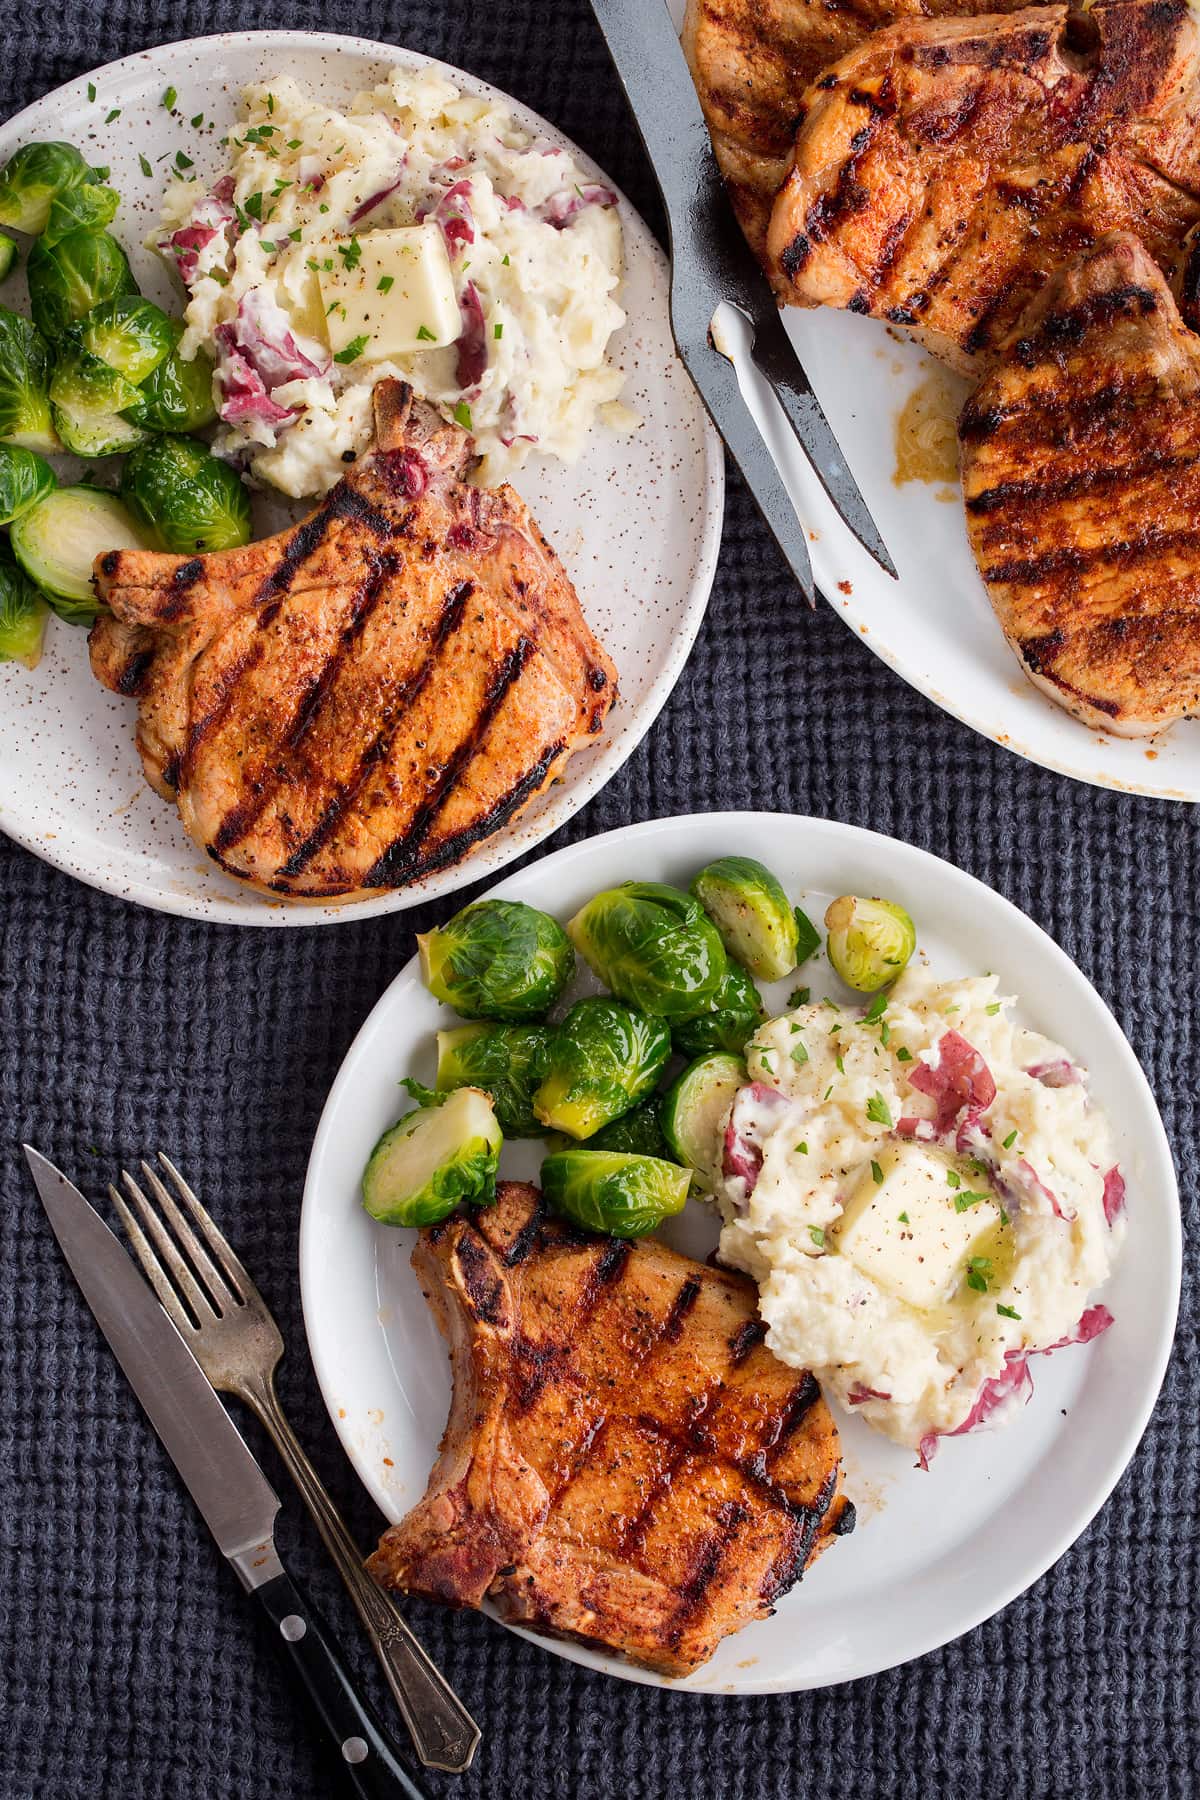 Showing serving suggestions sides to pair with grilled pork chops. Plate with pork chops, mashed potatoes and Brussesls sprouts.